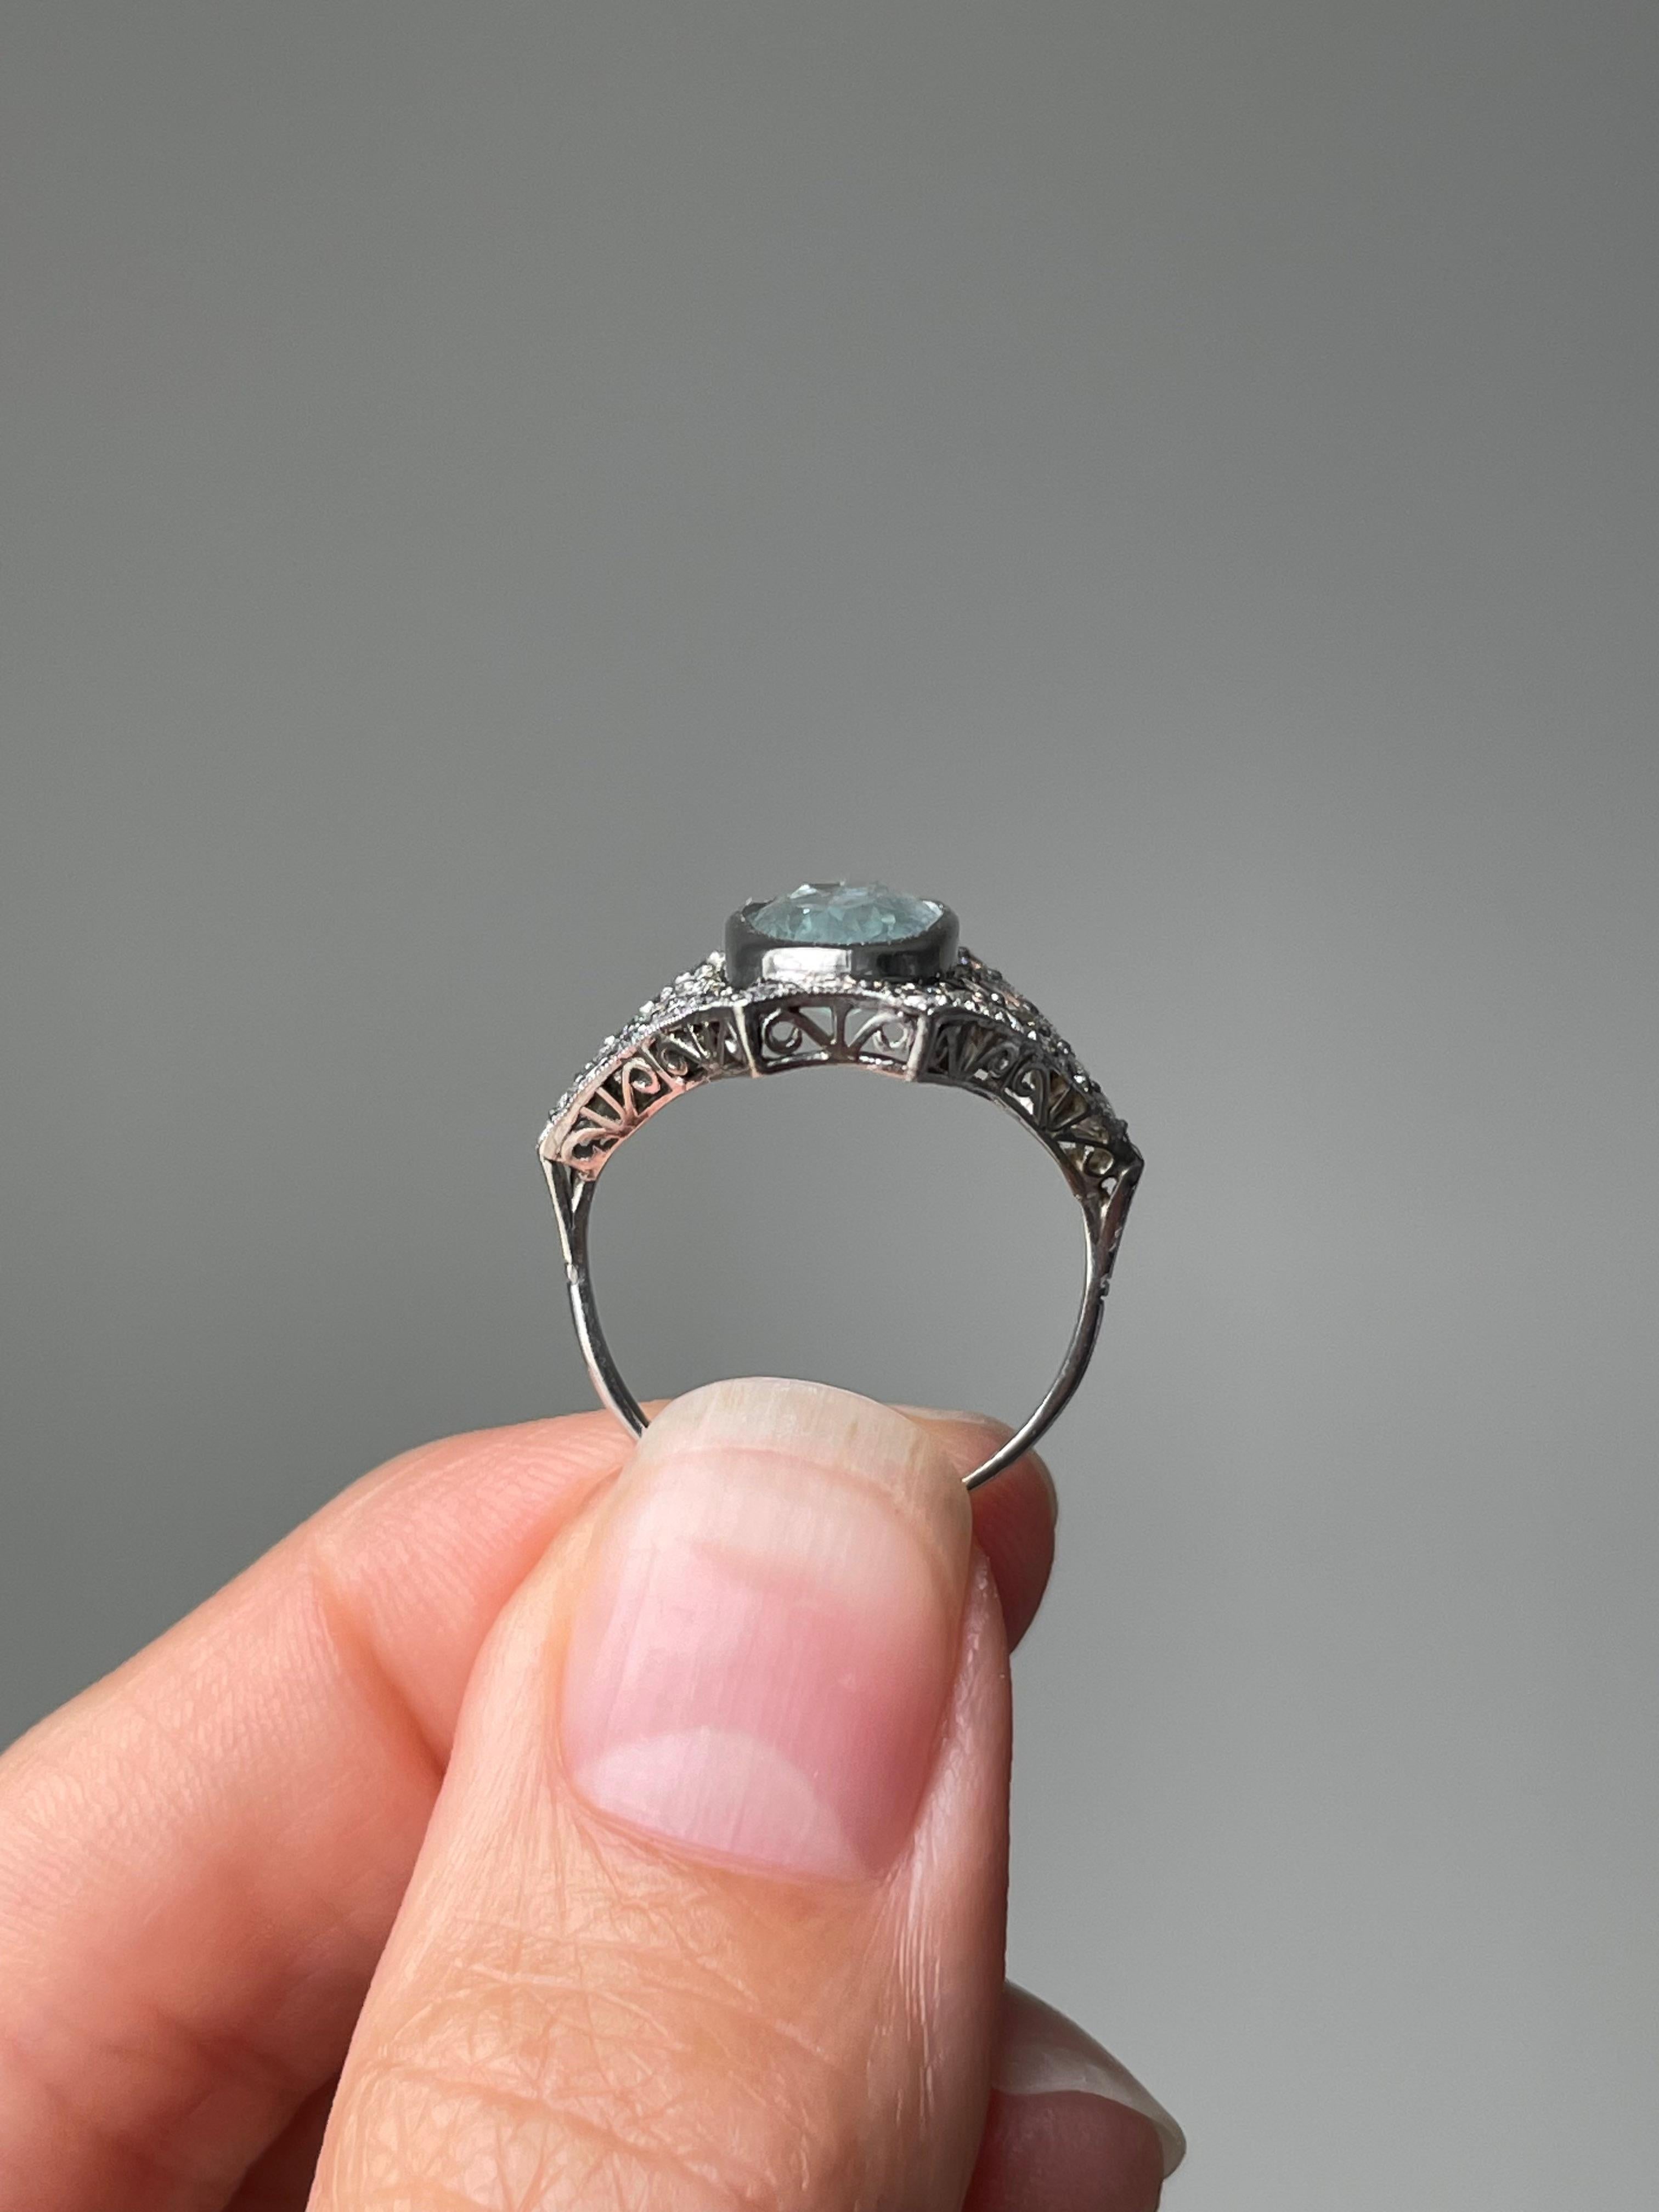 This elegant, finger elongating Art Deco style ring centers on a bezel-set baby blue aquamarine accented east and west by a sparking pair round diamonds, finished with  a sparkling diamond border. Presented in platinum, this ring is exceptionally